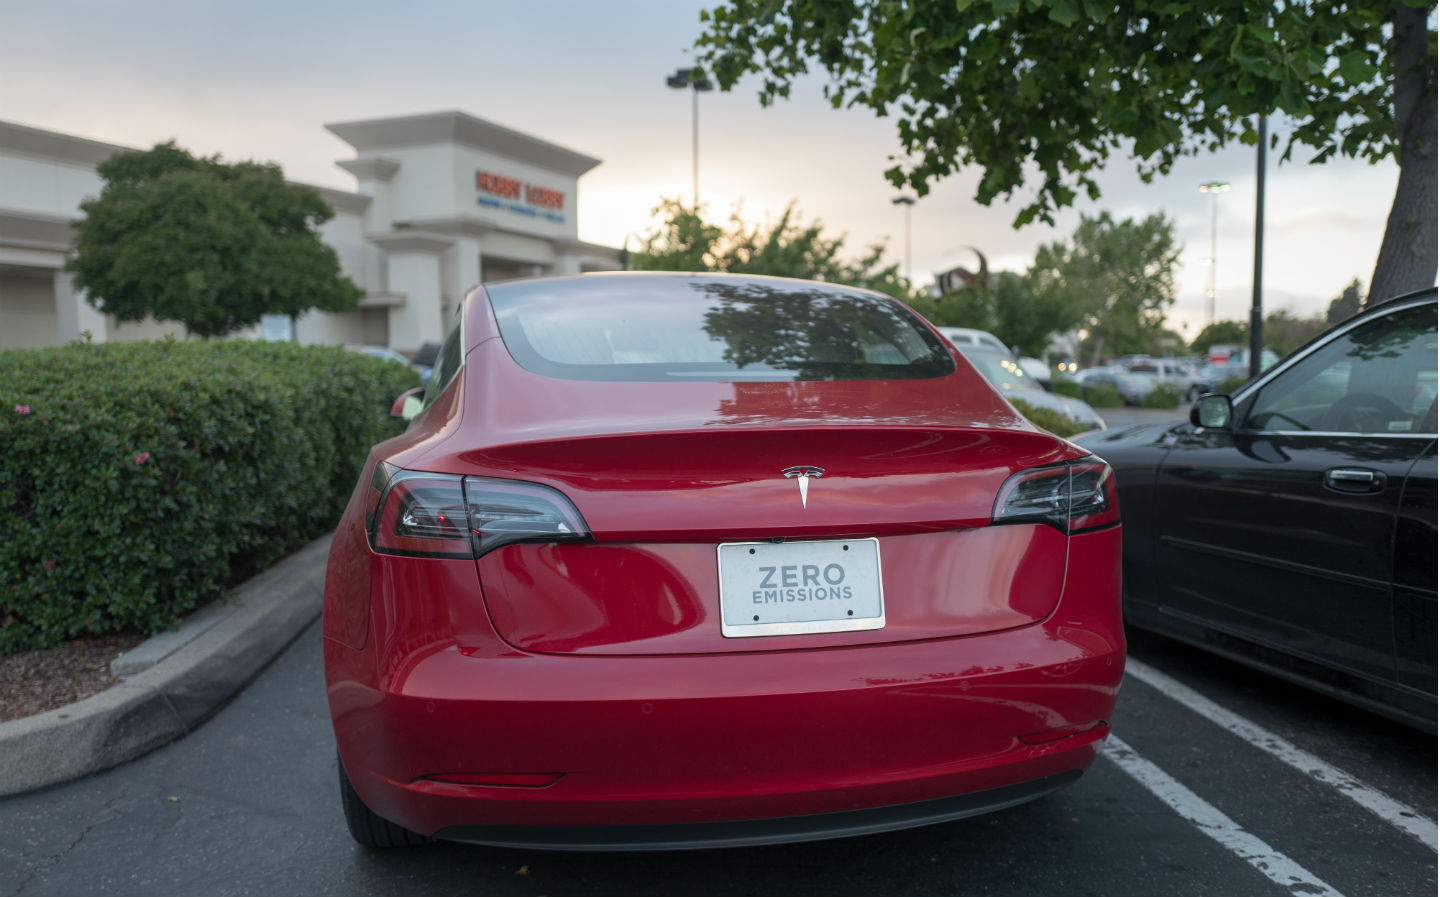 Tesla announce 'Summon' Autopilot parking system update is coming to Model 3